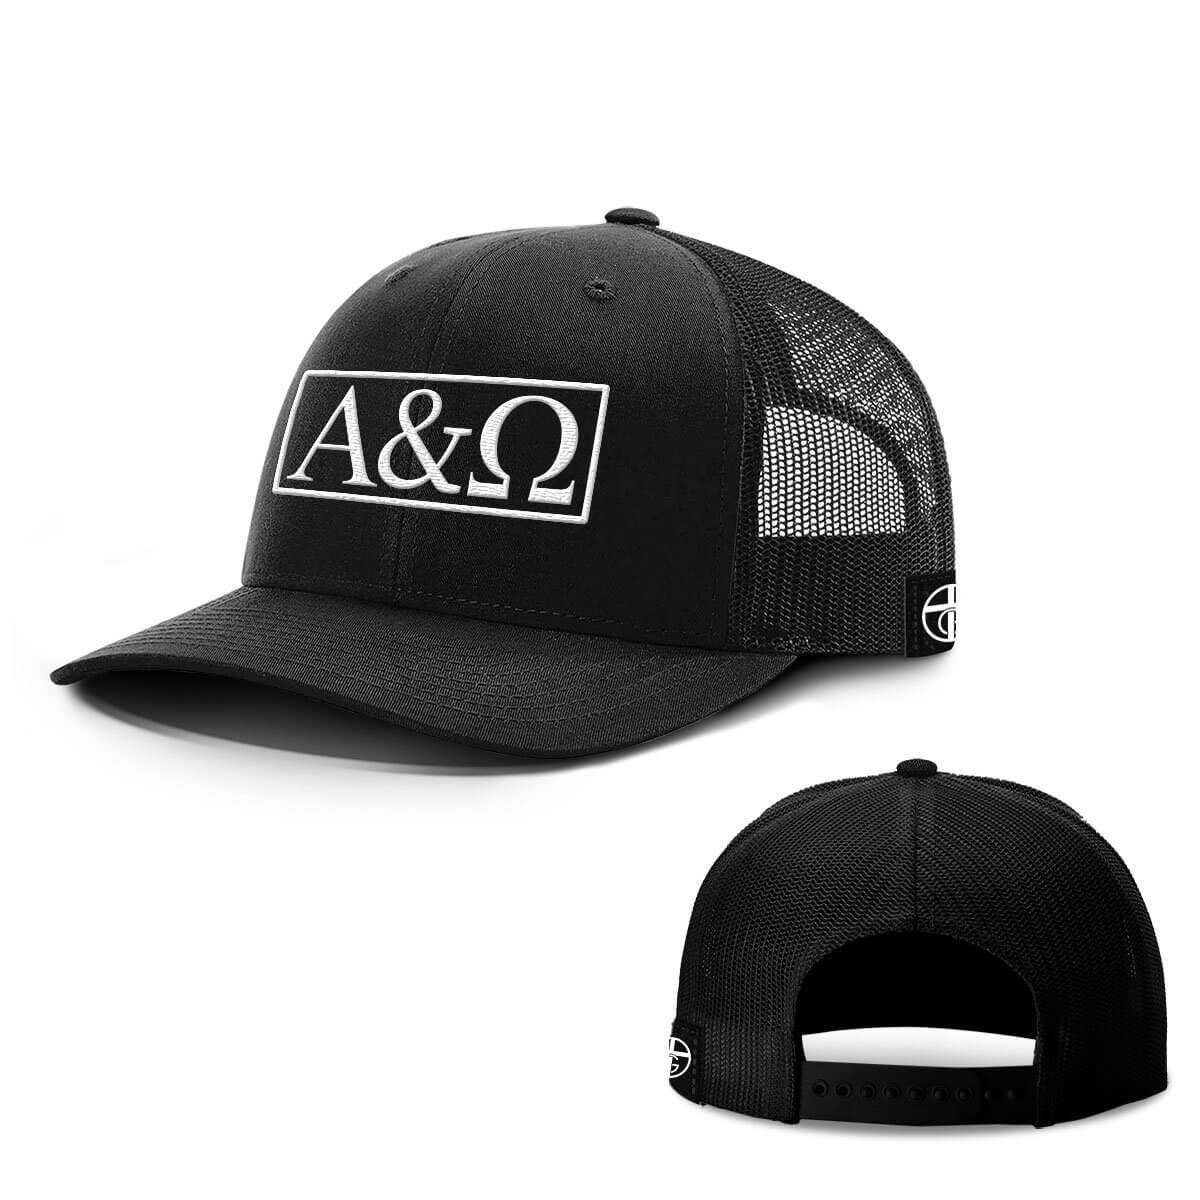 The Alpha and Omega Hats - Our True God